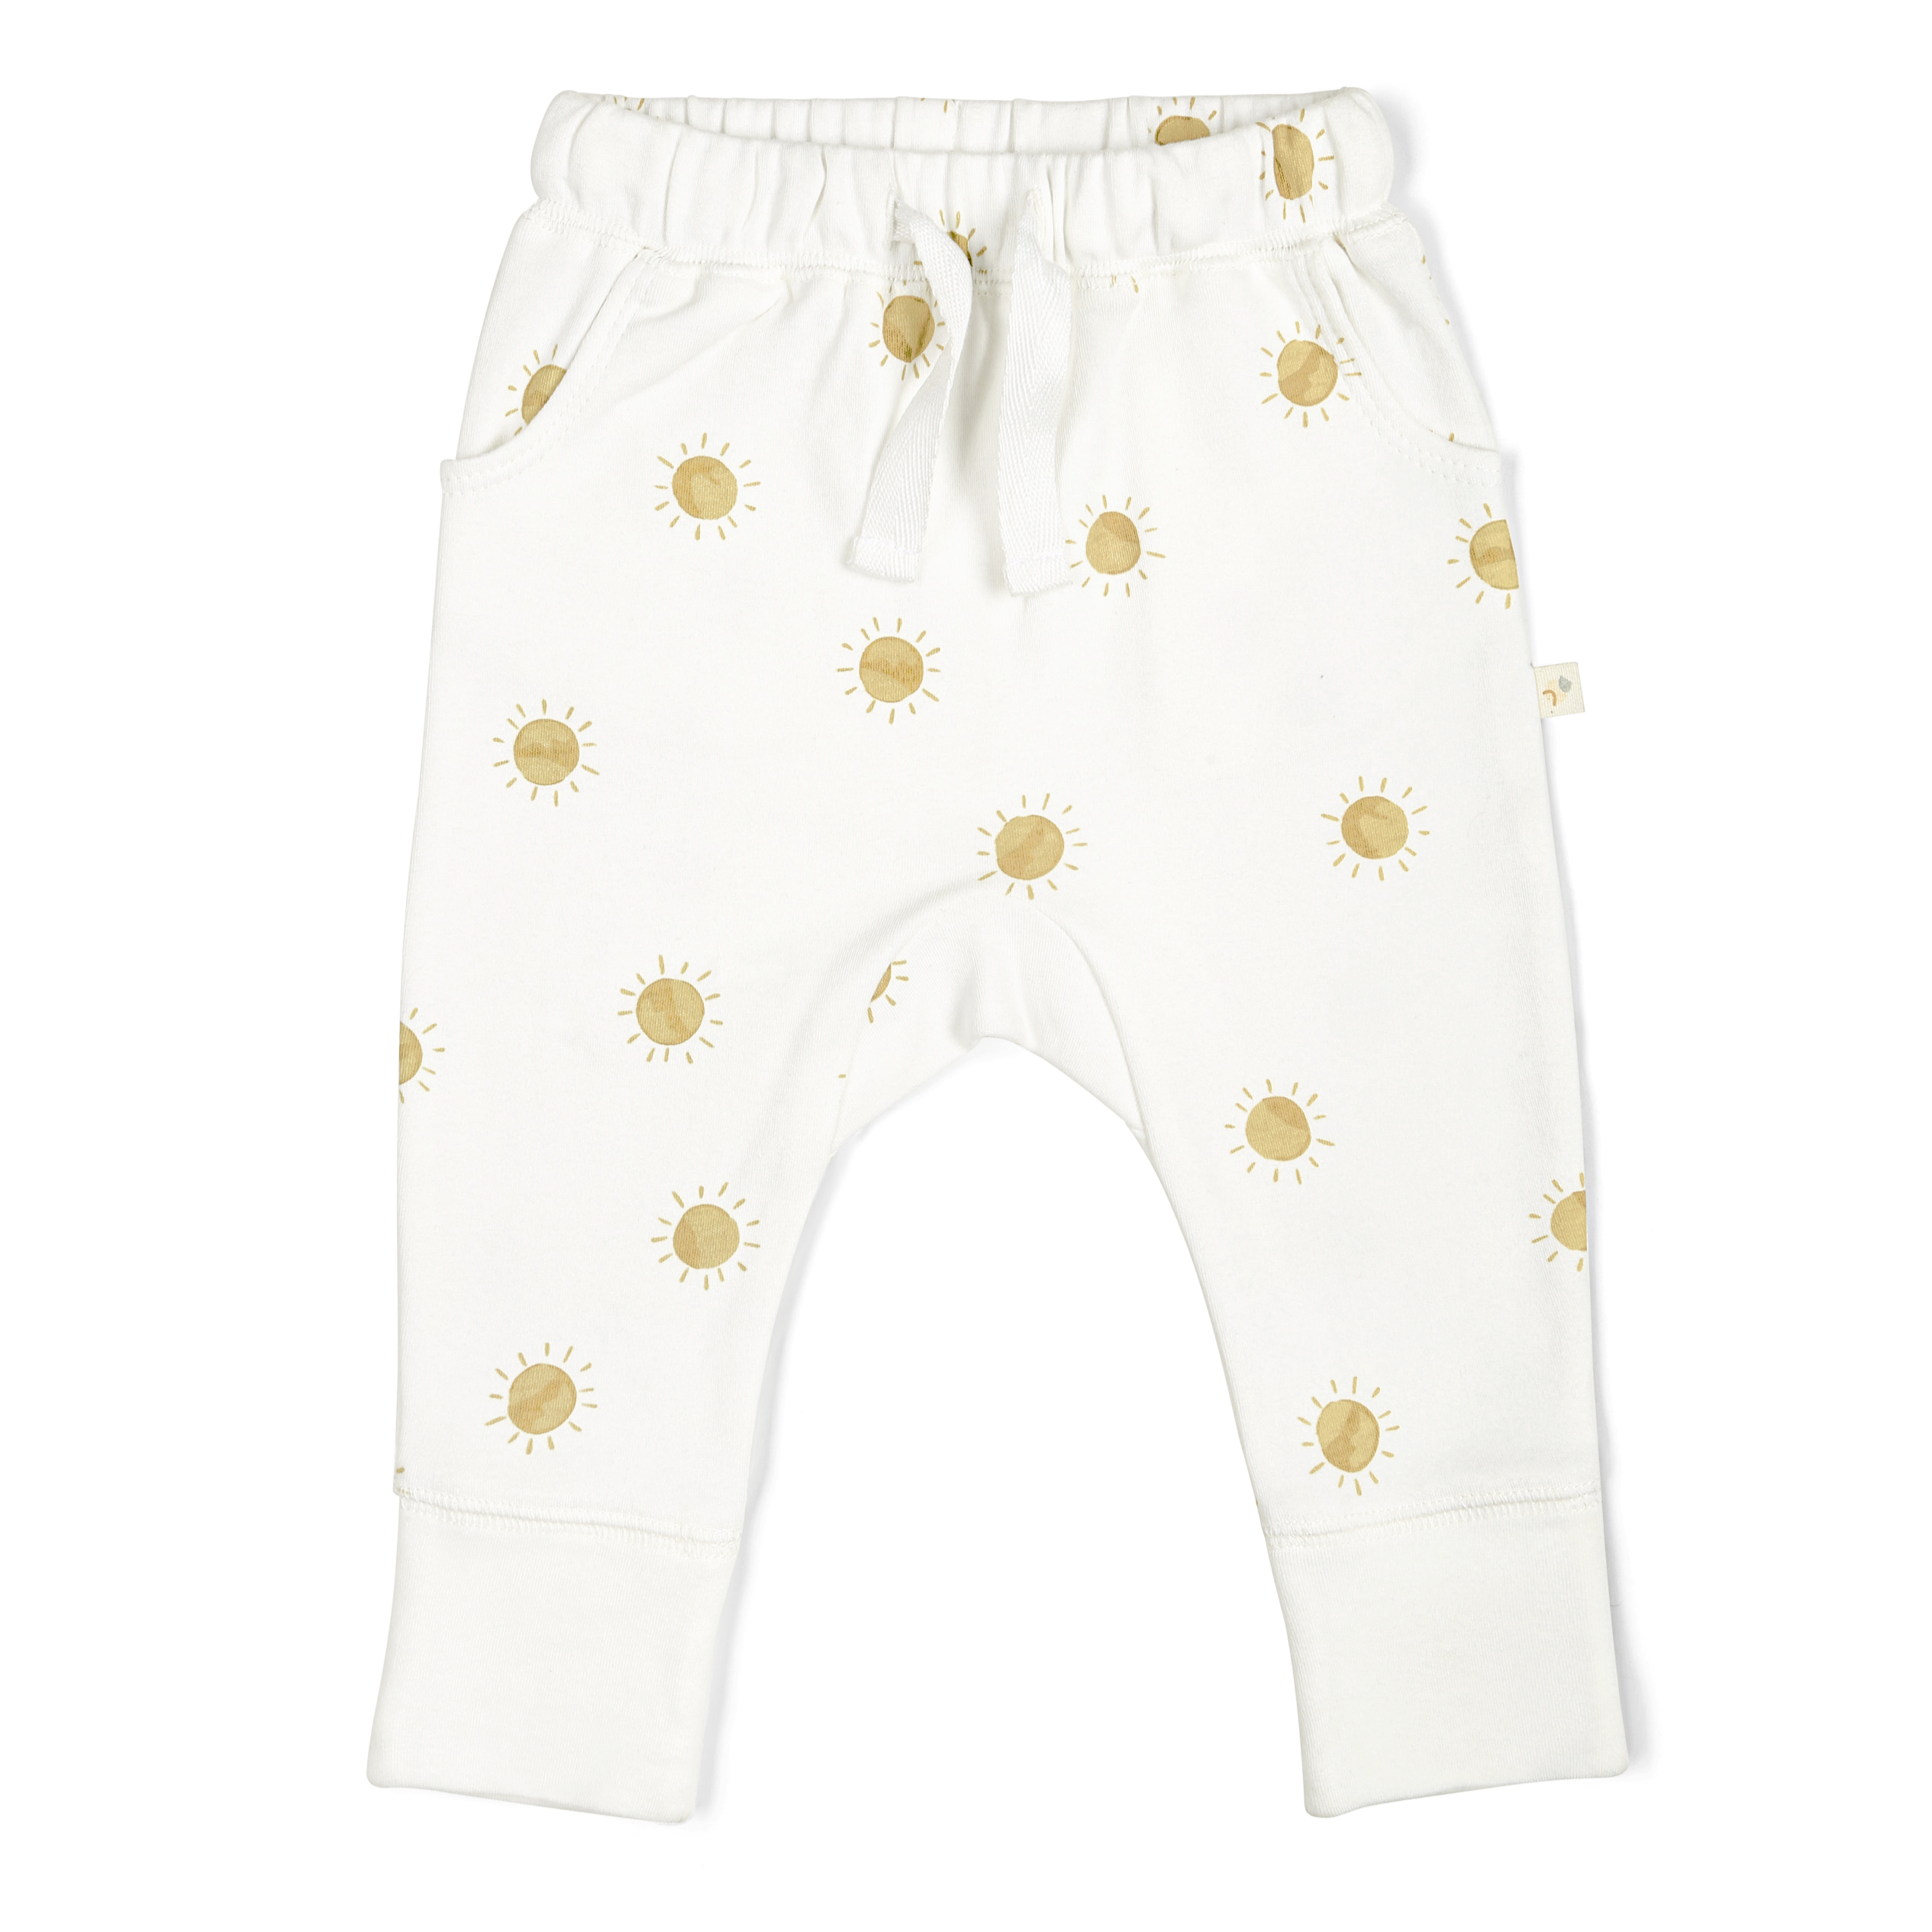 White toddler Organic Harem Pants - Sunshine with a pattern of golden suns, featuring a drawstring waist and cuffed ankles, displayed on a plain background by Makemake Organics.